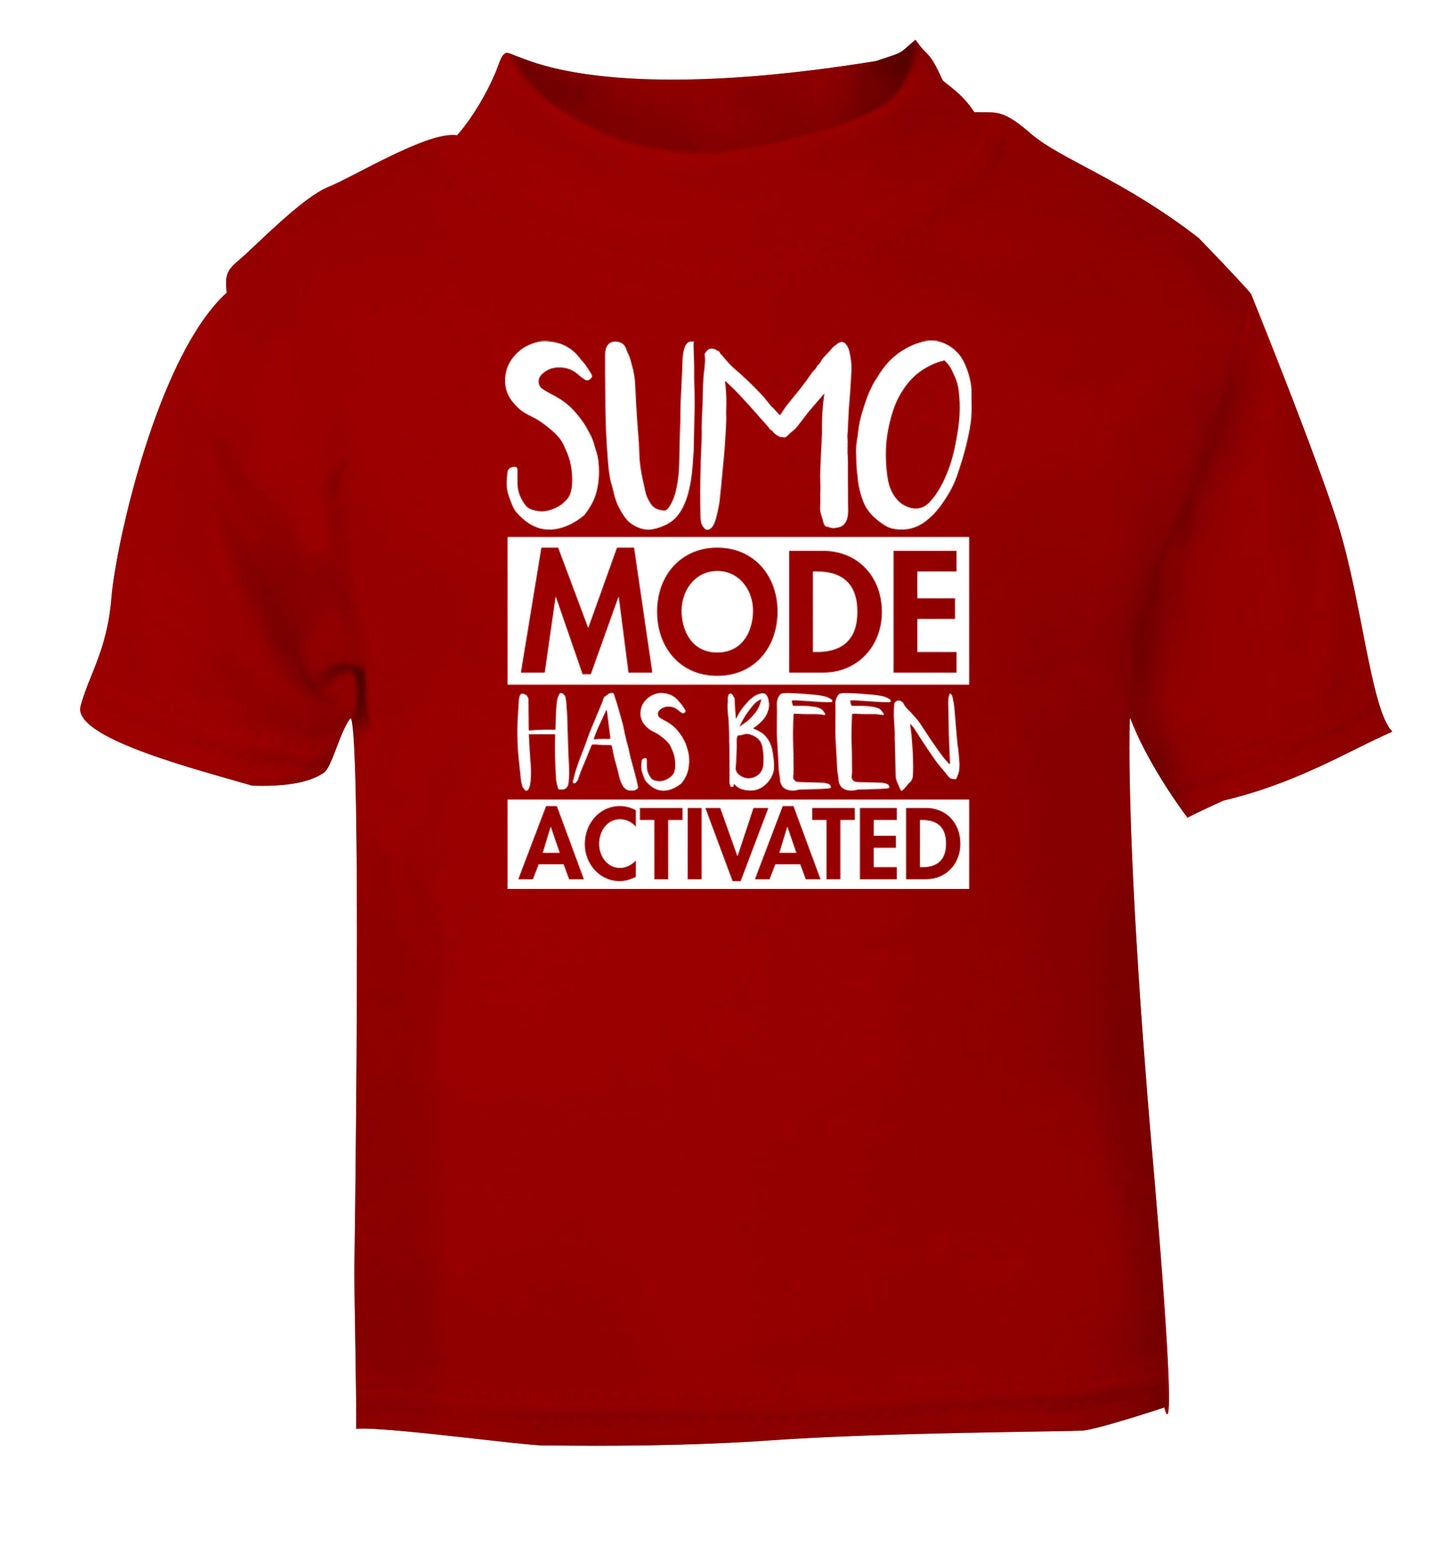 Sumo mode activated red Baby Toddler Tshirt 2 Years